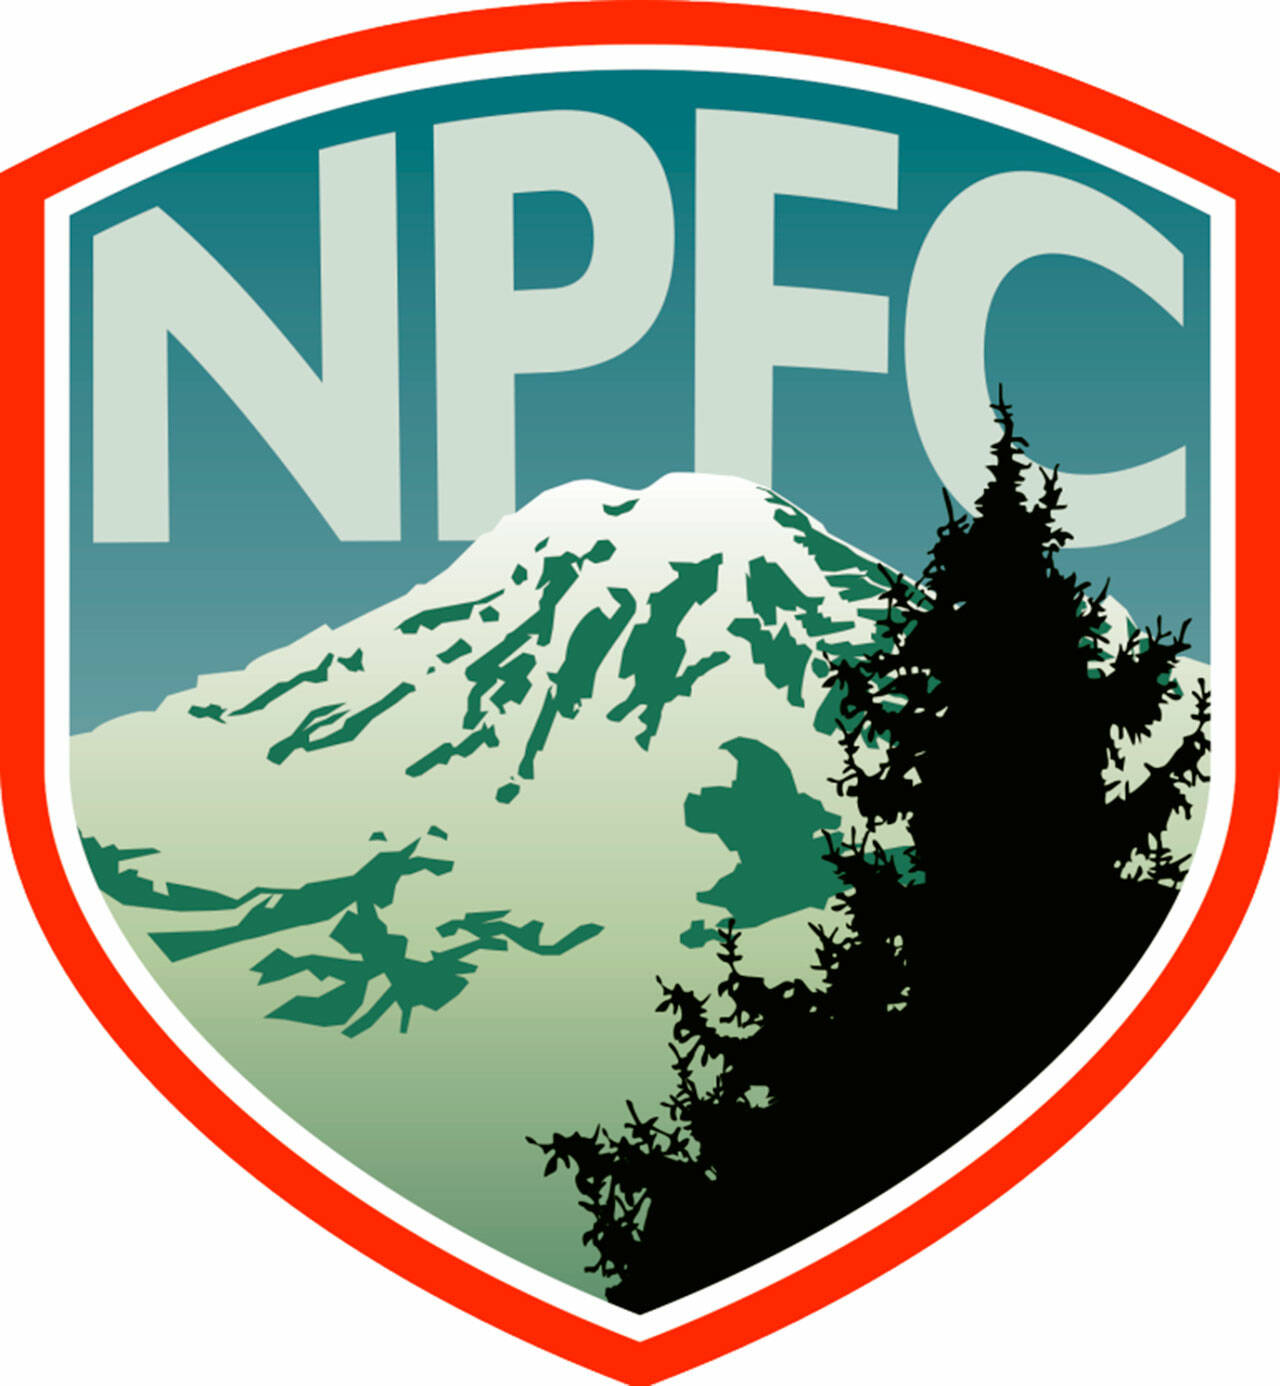 The club crest of the new Northern Peninsula Football Club, an adult soccer team that will compete in the Western Washington Premier League’s Second Division this spring. The team will practice in Sequim and play games at Memorial Field in Port Townsend.